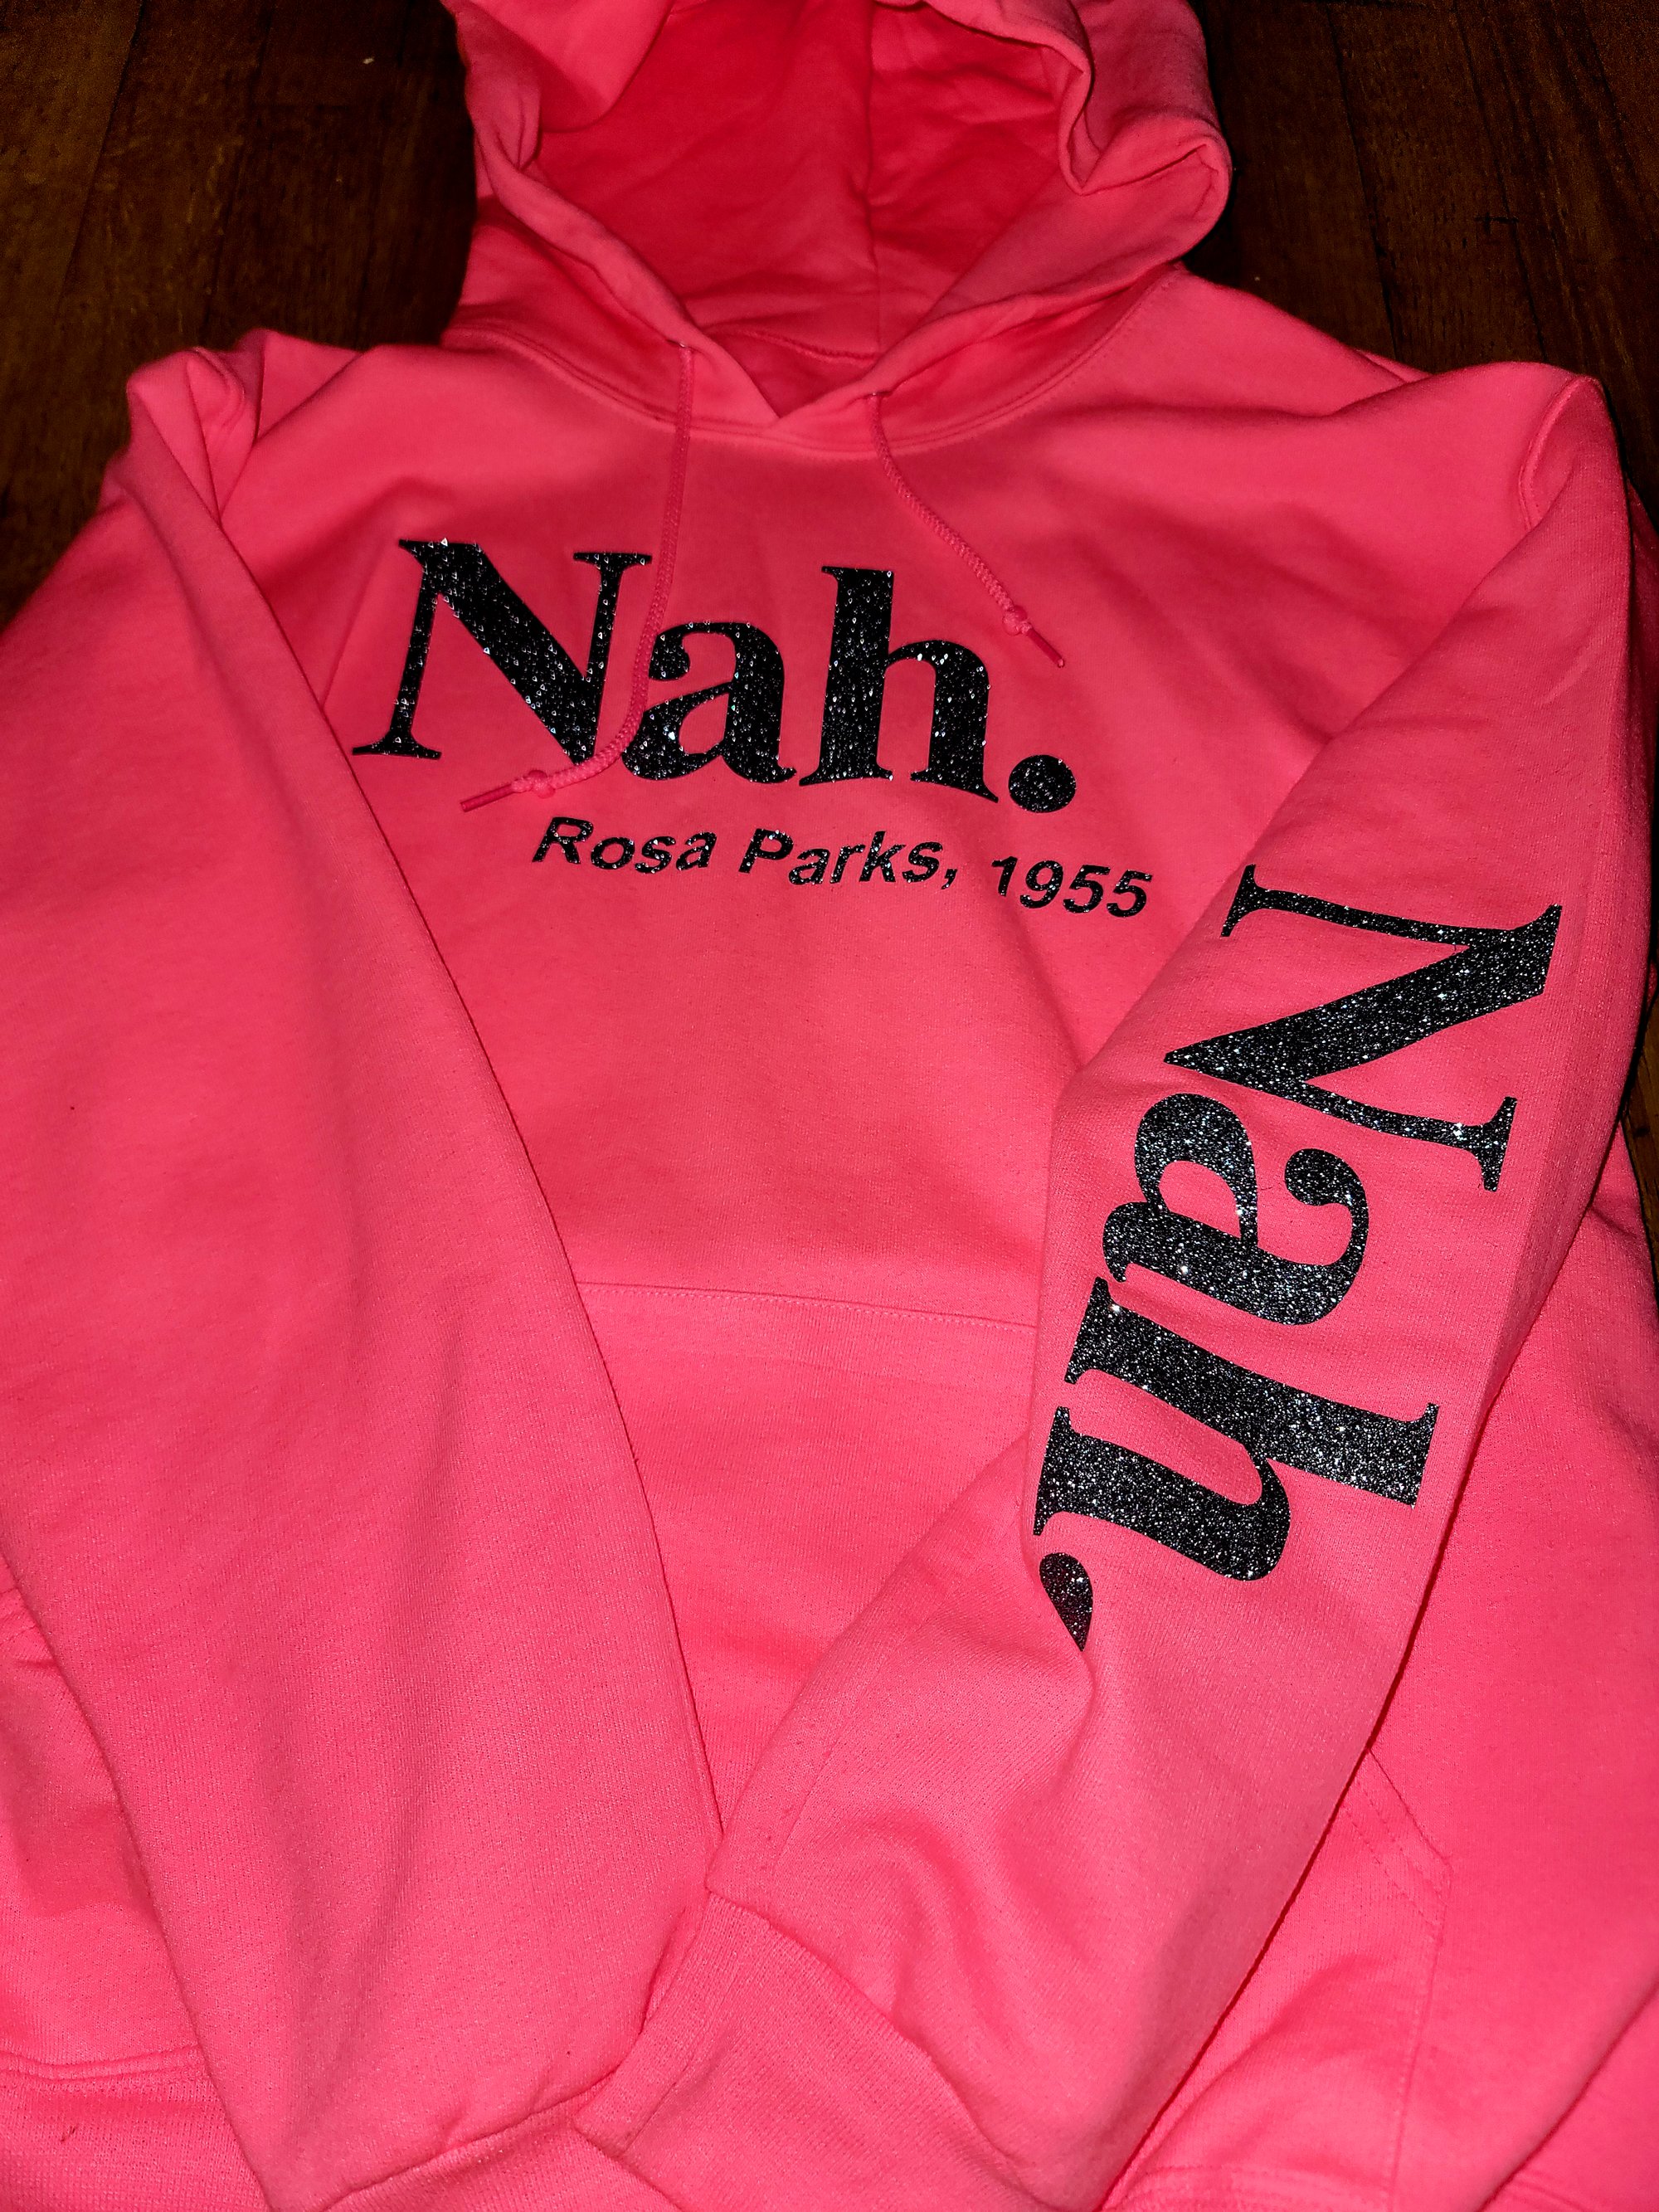 The Nah, Neon Pink, Rosa Parks hoodie | Get-Ill